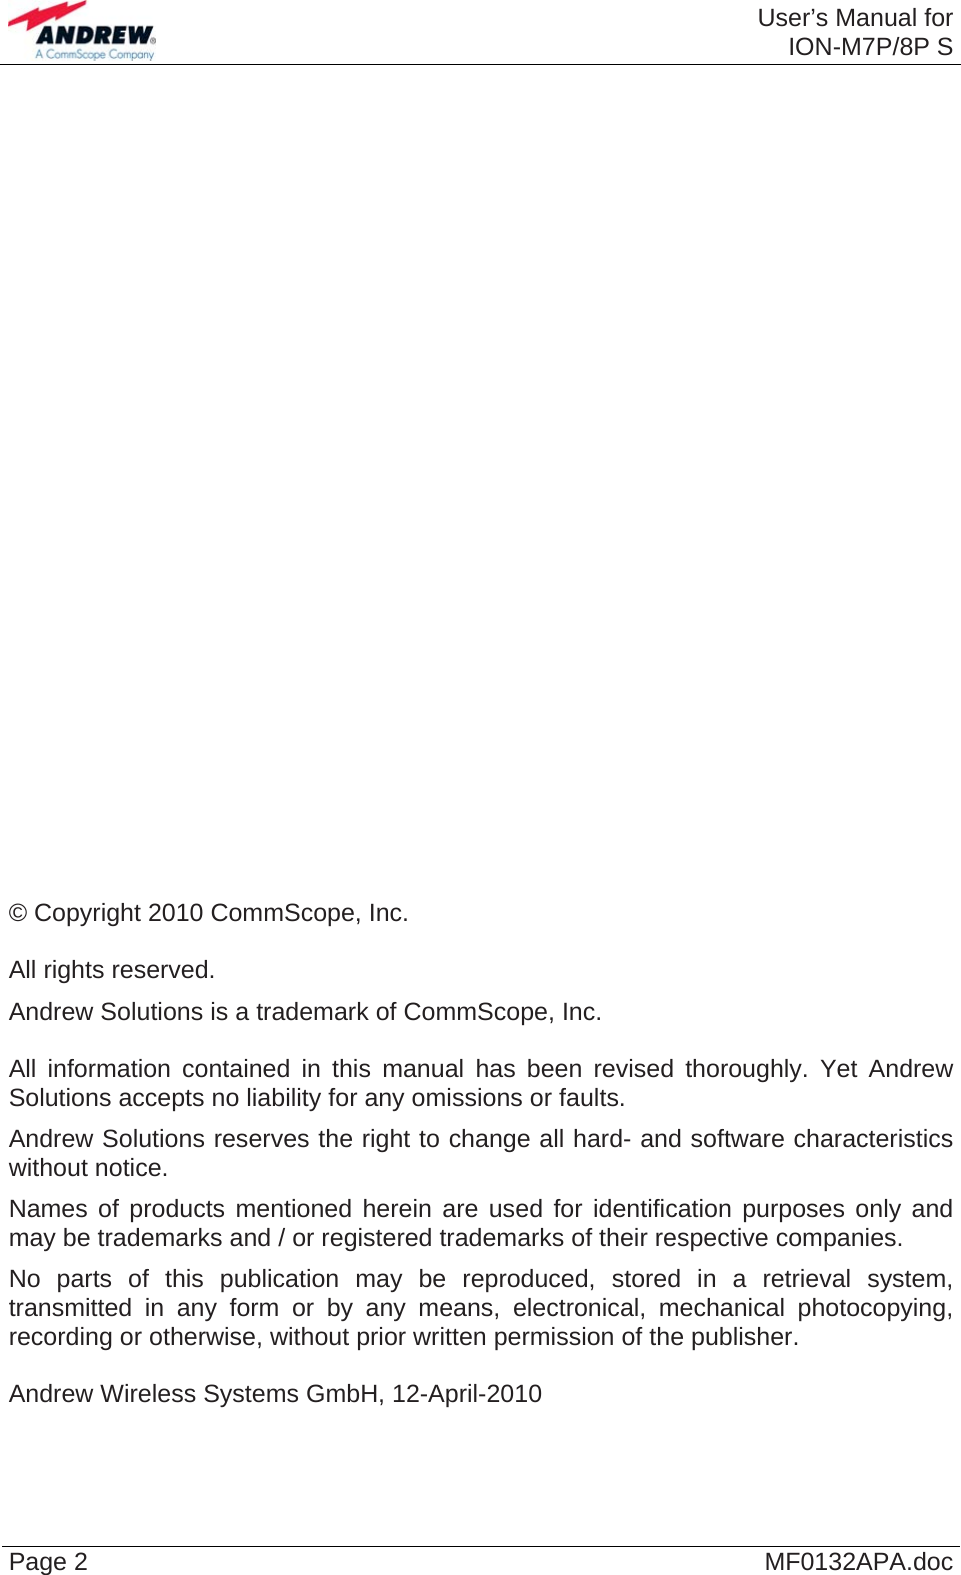  User’s Manual forION-M7P/8P S Page 2  MF0132APA.doc                             © Copyright 2010 CommScope, Inc.  All rights reserved. Andrew Solutions is a trademark of CommScope, Inc.  All information contained in this manual has been revised thoroughly. Yet Andrew Solutions accepts no liability for any omissions or faults. Andrew Solutions reserves the right to change all hard- and software characteristics without notice. Names of products mentioned herein are used for identification purposes only and may be trademarks and / or registered trademarks of their respective companies. No parts of this publication may be reproduced, stored in a retrieval system, transmitted in any form or by any means, electronical, mechanical photocopying, recording or otherwise, without prior written permission of the publisher.  Andrew Wireless Systems GmbH, 12-April-2010  